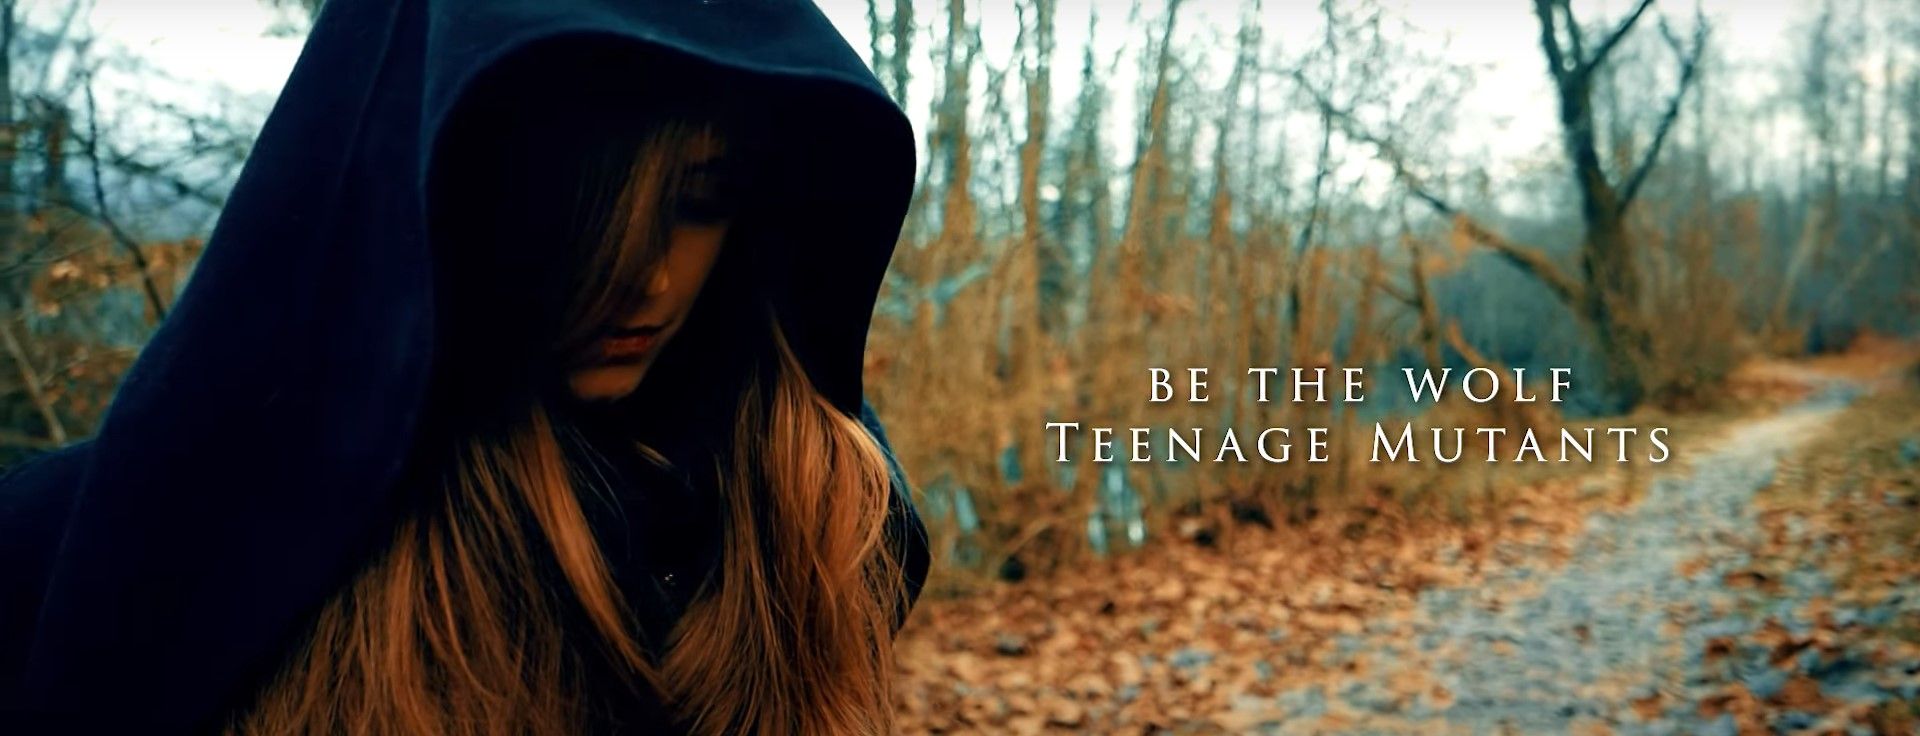 Be The Wolf - Teenage Mutants (Official)